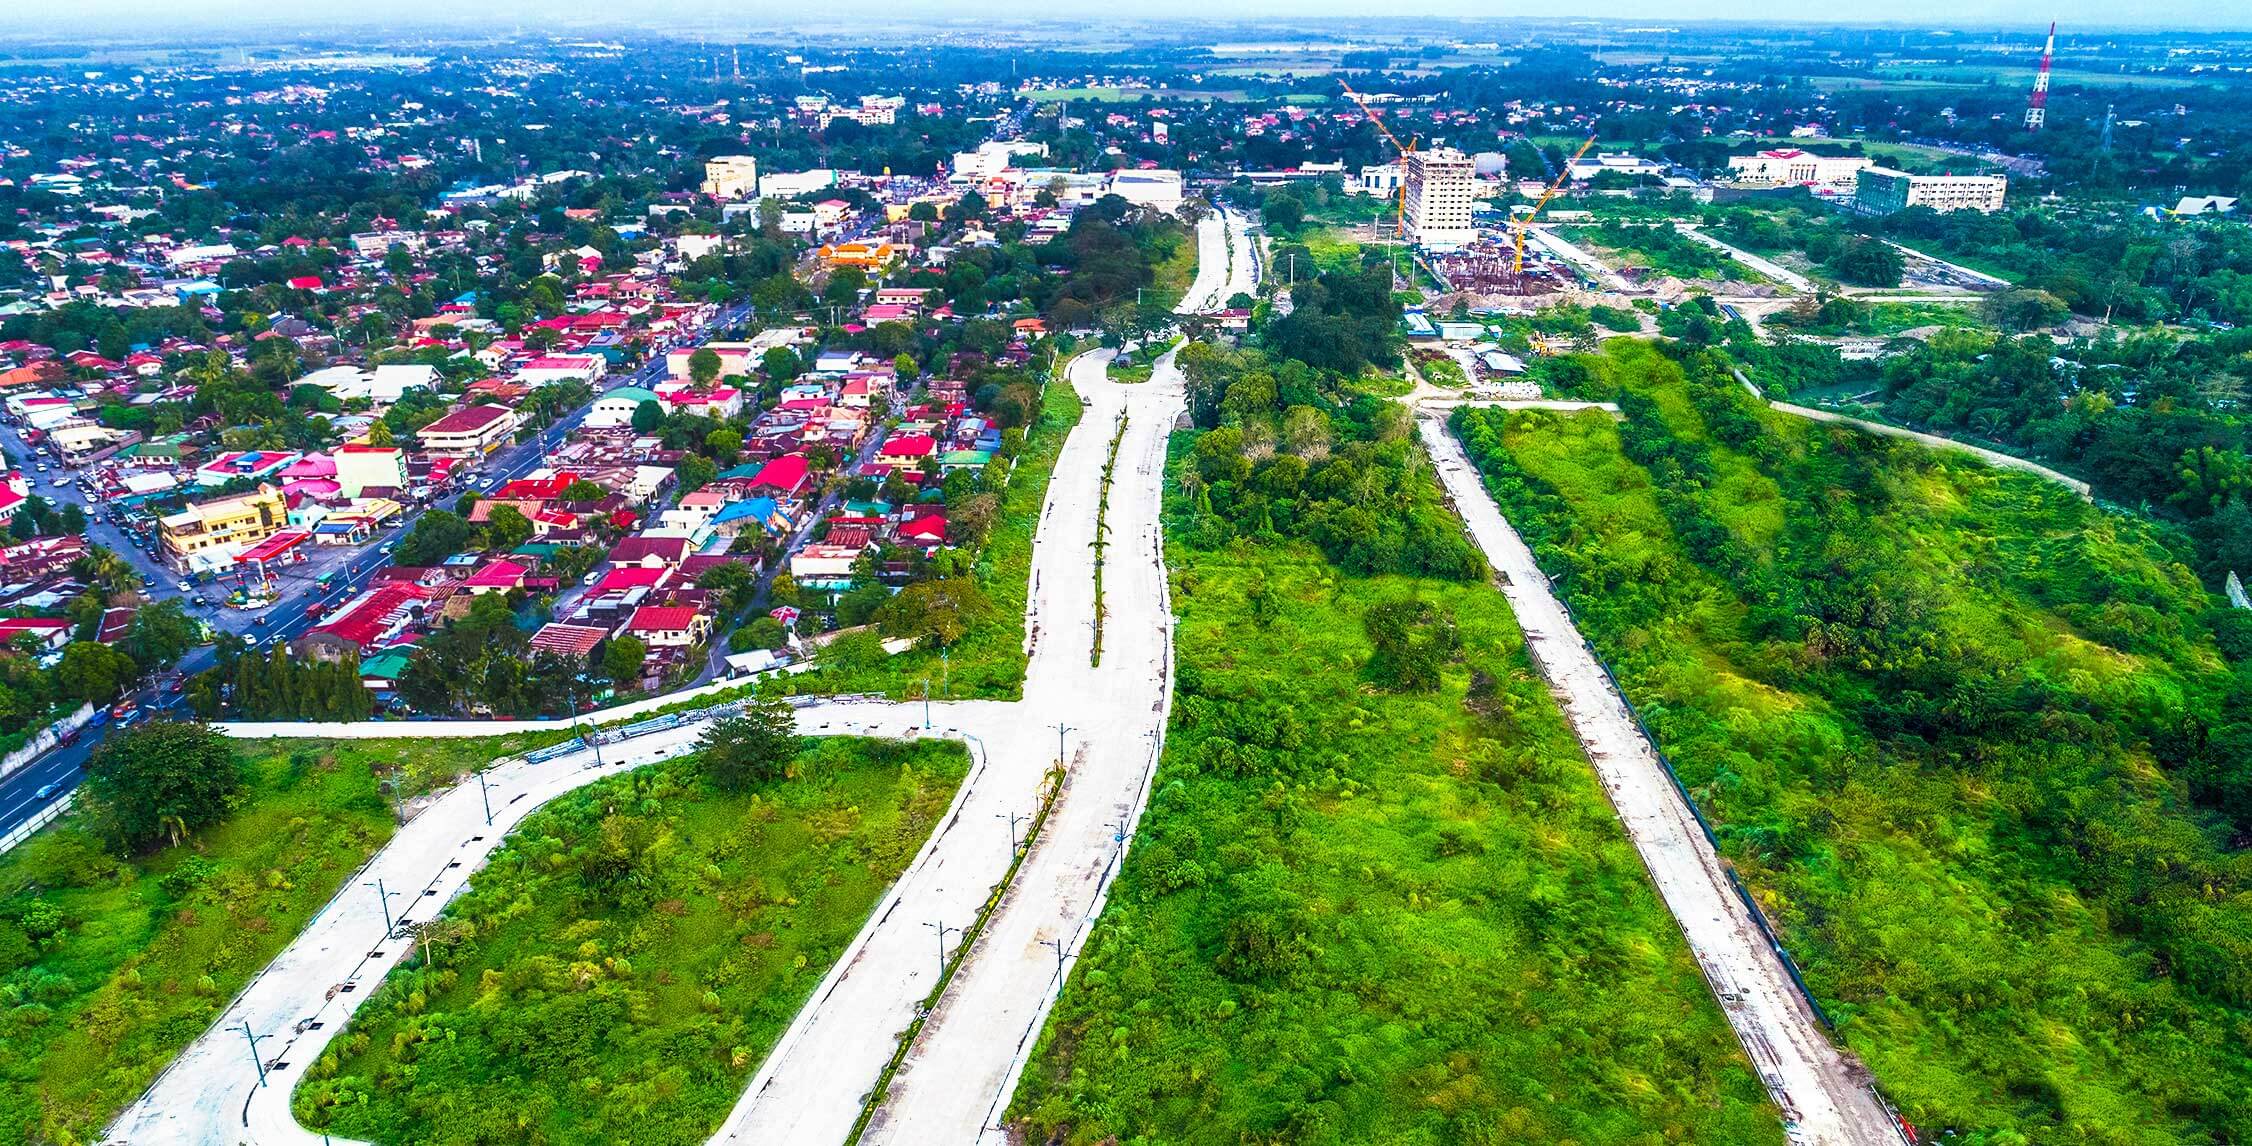 Ongoing developments inside the 34-hectare The Upper East township in Bacolod City where the company plans to build more office towers, malls, and residential towers in the next 5 years.